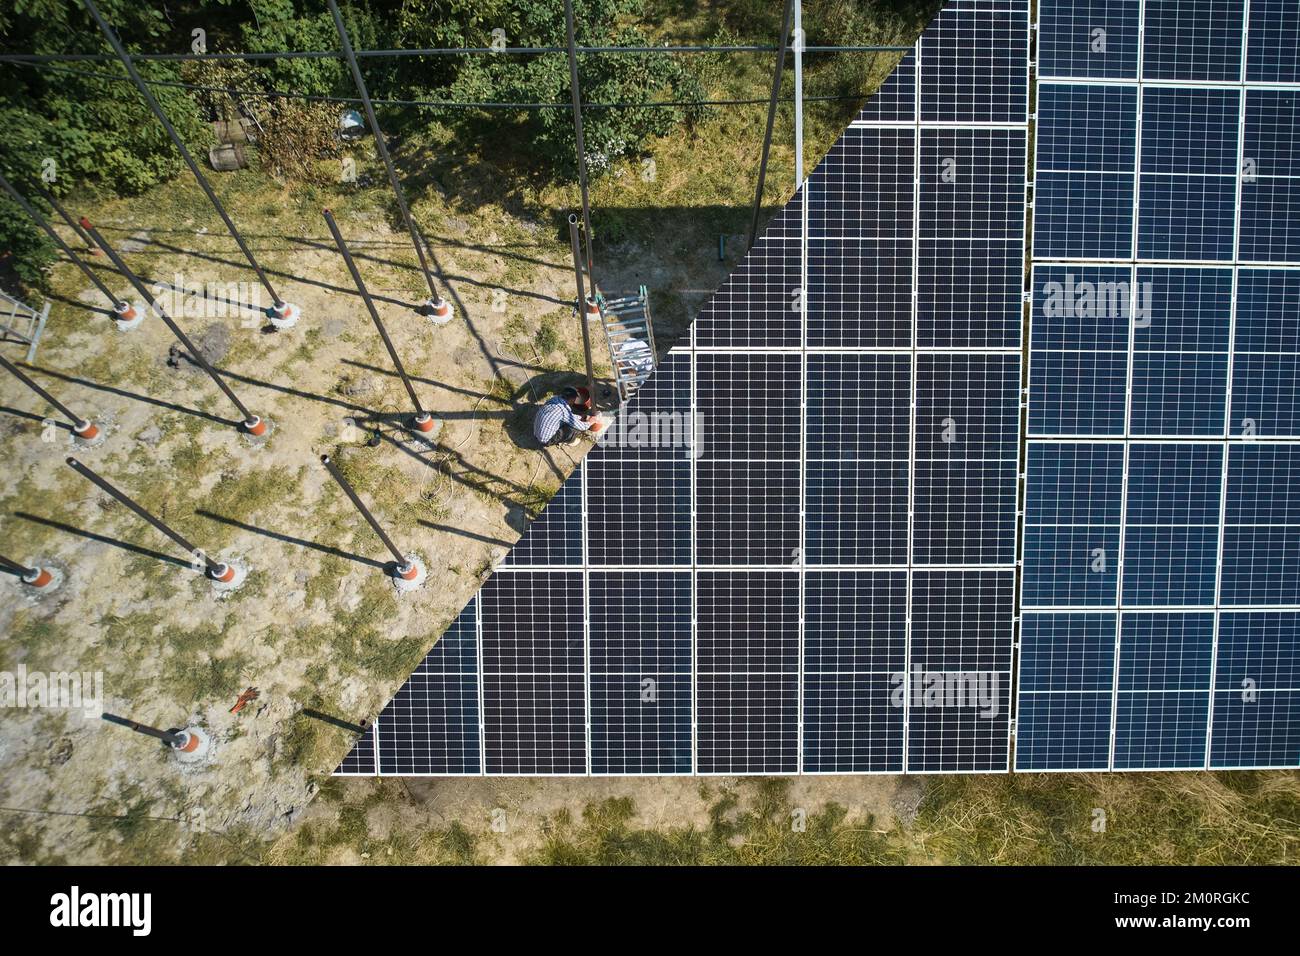 Photovoltaic solar panel fading away and shifting into metal supporting structure. Transition between solar module and metal poles in grassy field. Before and after concept. Stock Photo